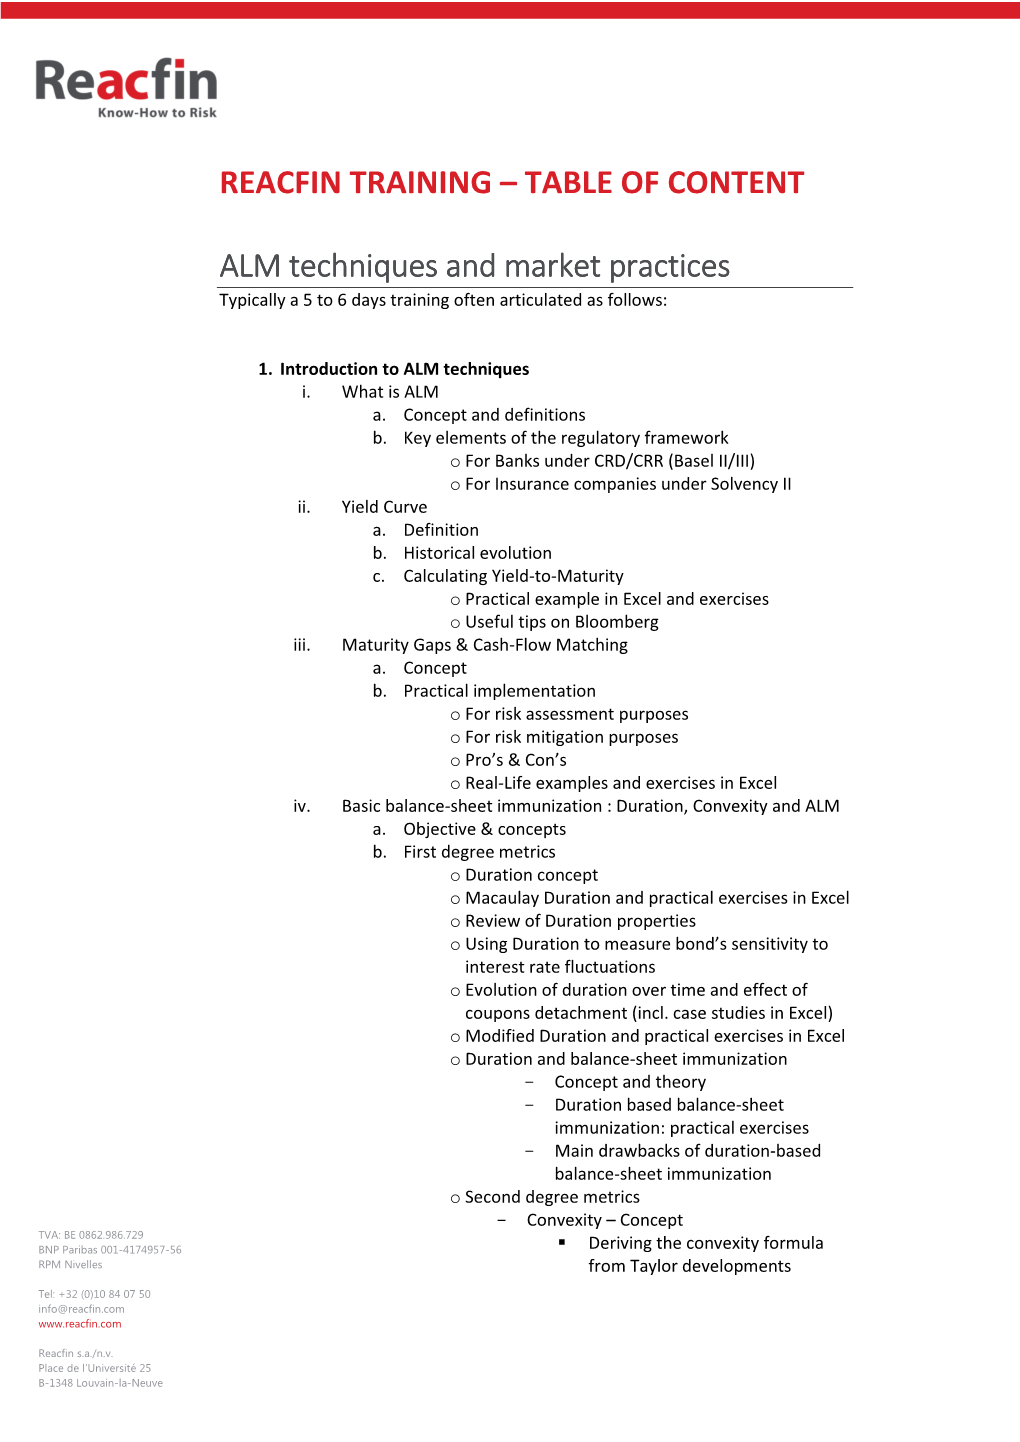 REACFIN TRAINING – TABLE of CONTENT ALM Techniques and Market Practices Typically a 5 to 6 Days Training Often Articulated As Follows